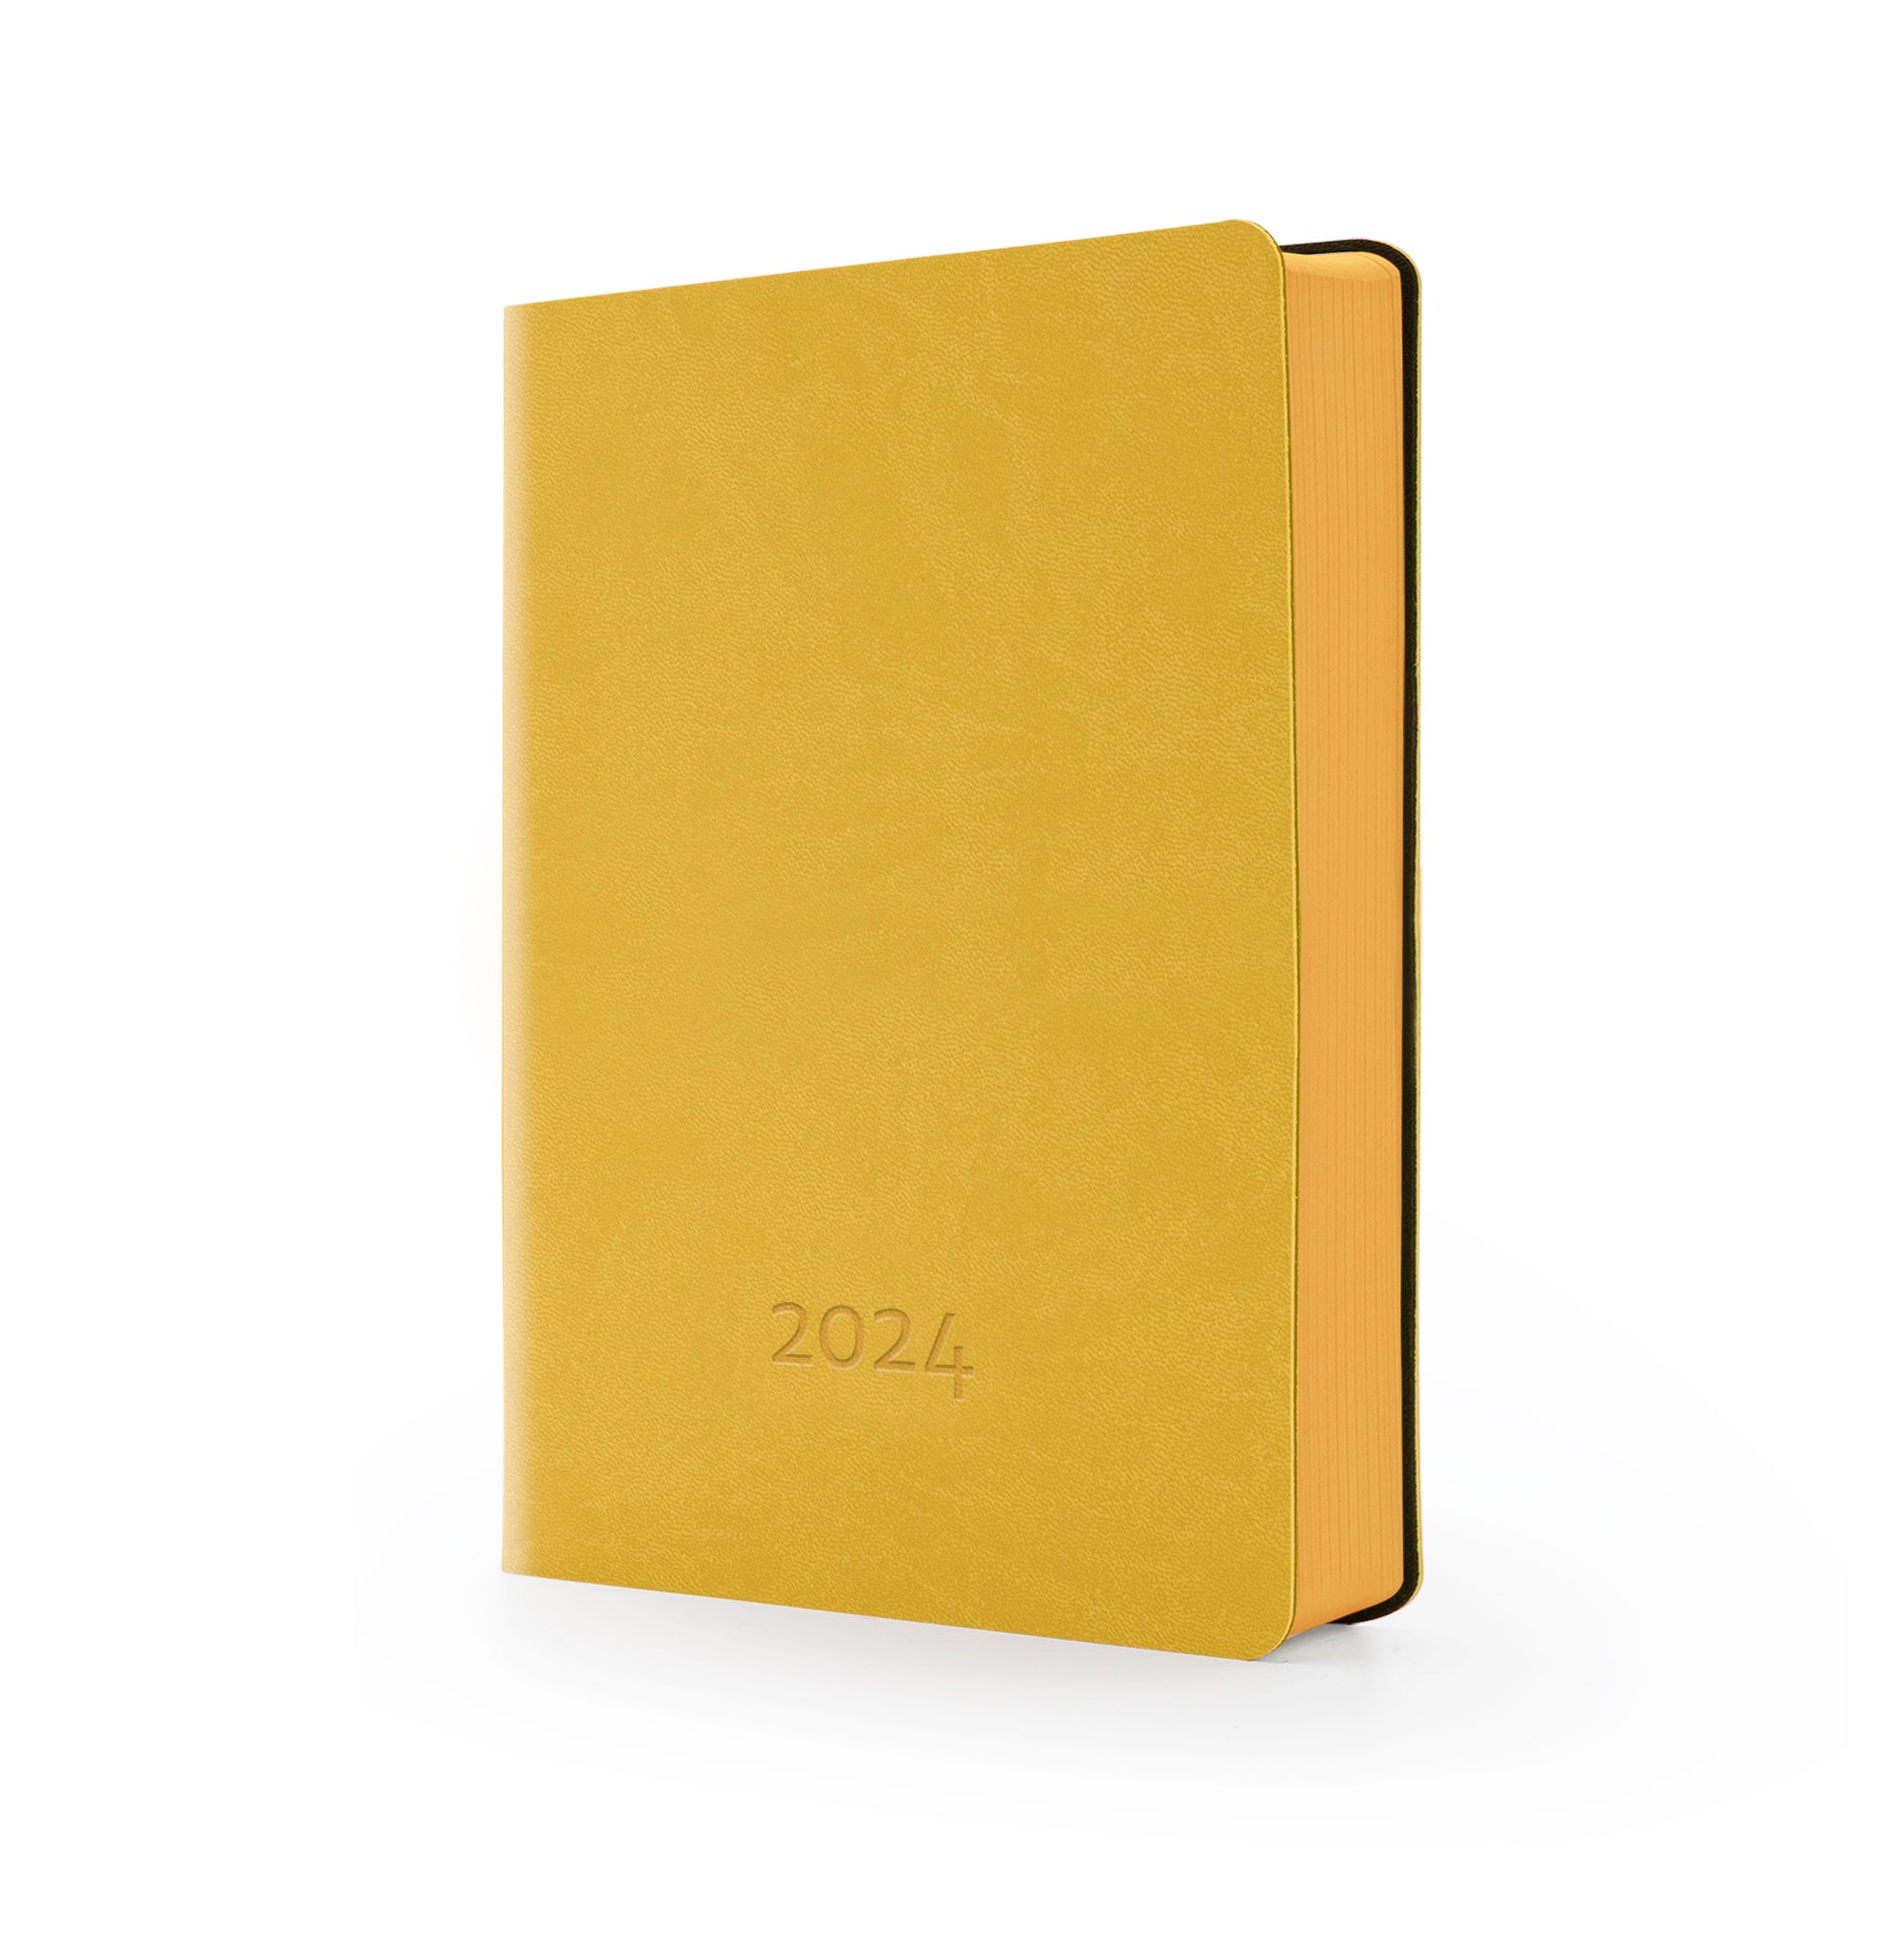 Image shows a Flexi Yellow MOM/WOW diary